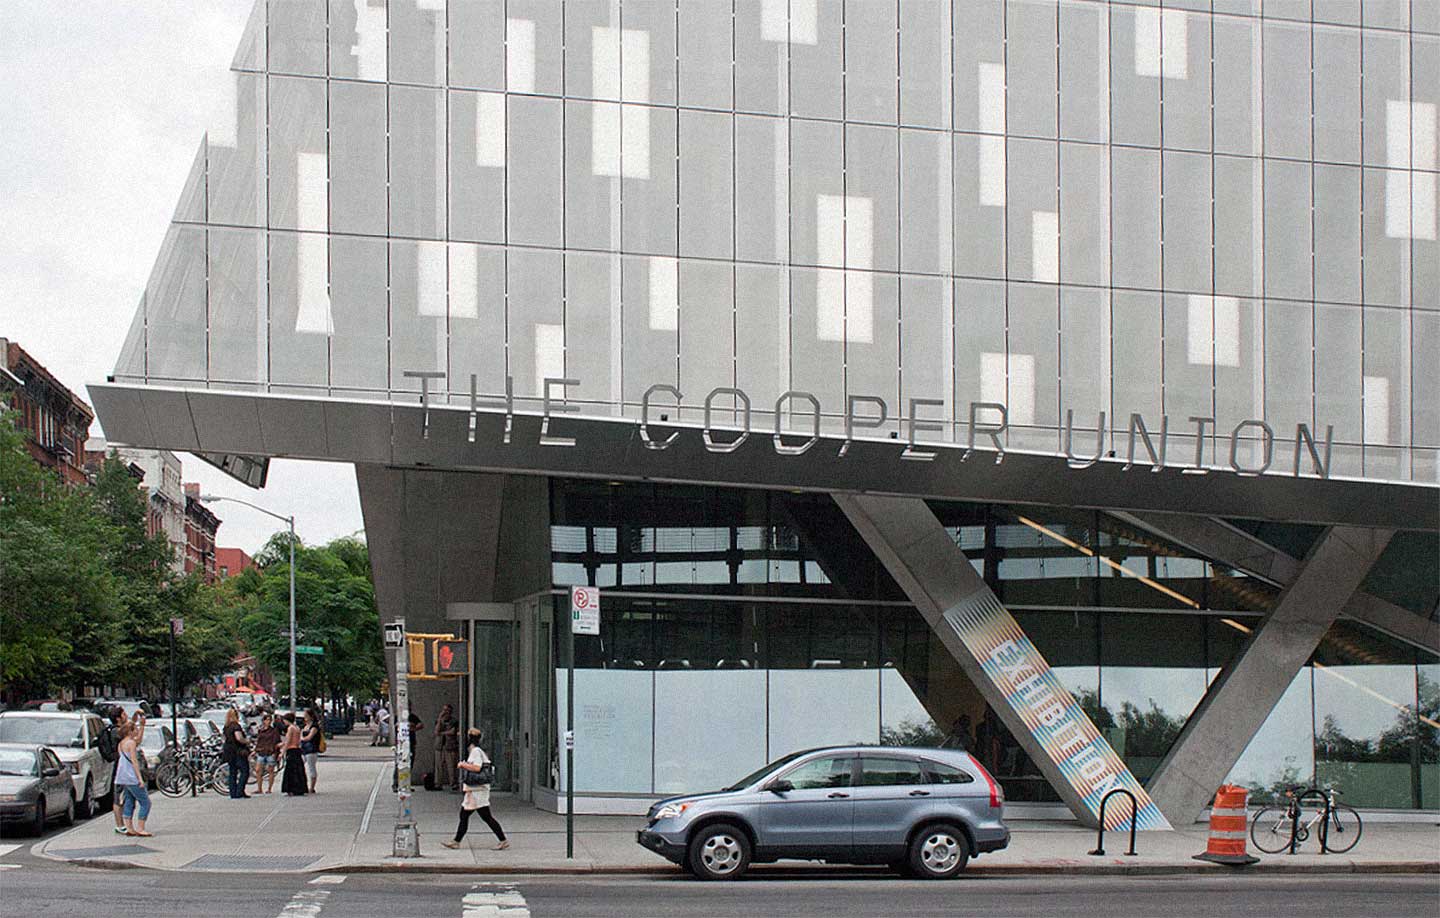 Detail of the Cooper Union New Academic Building signage.